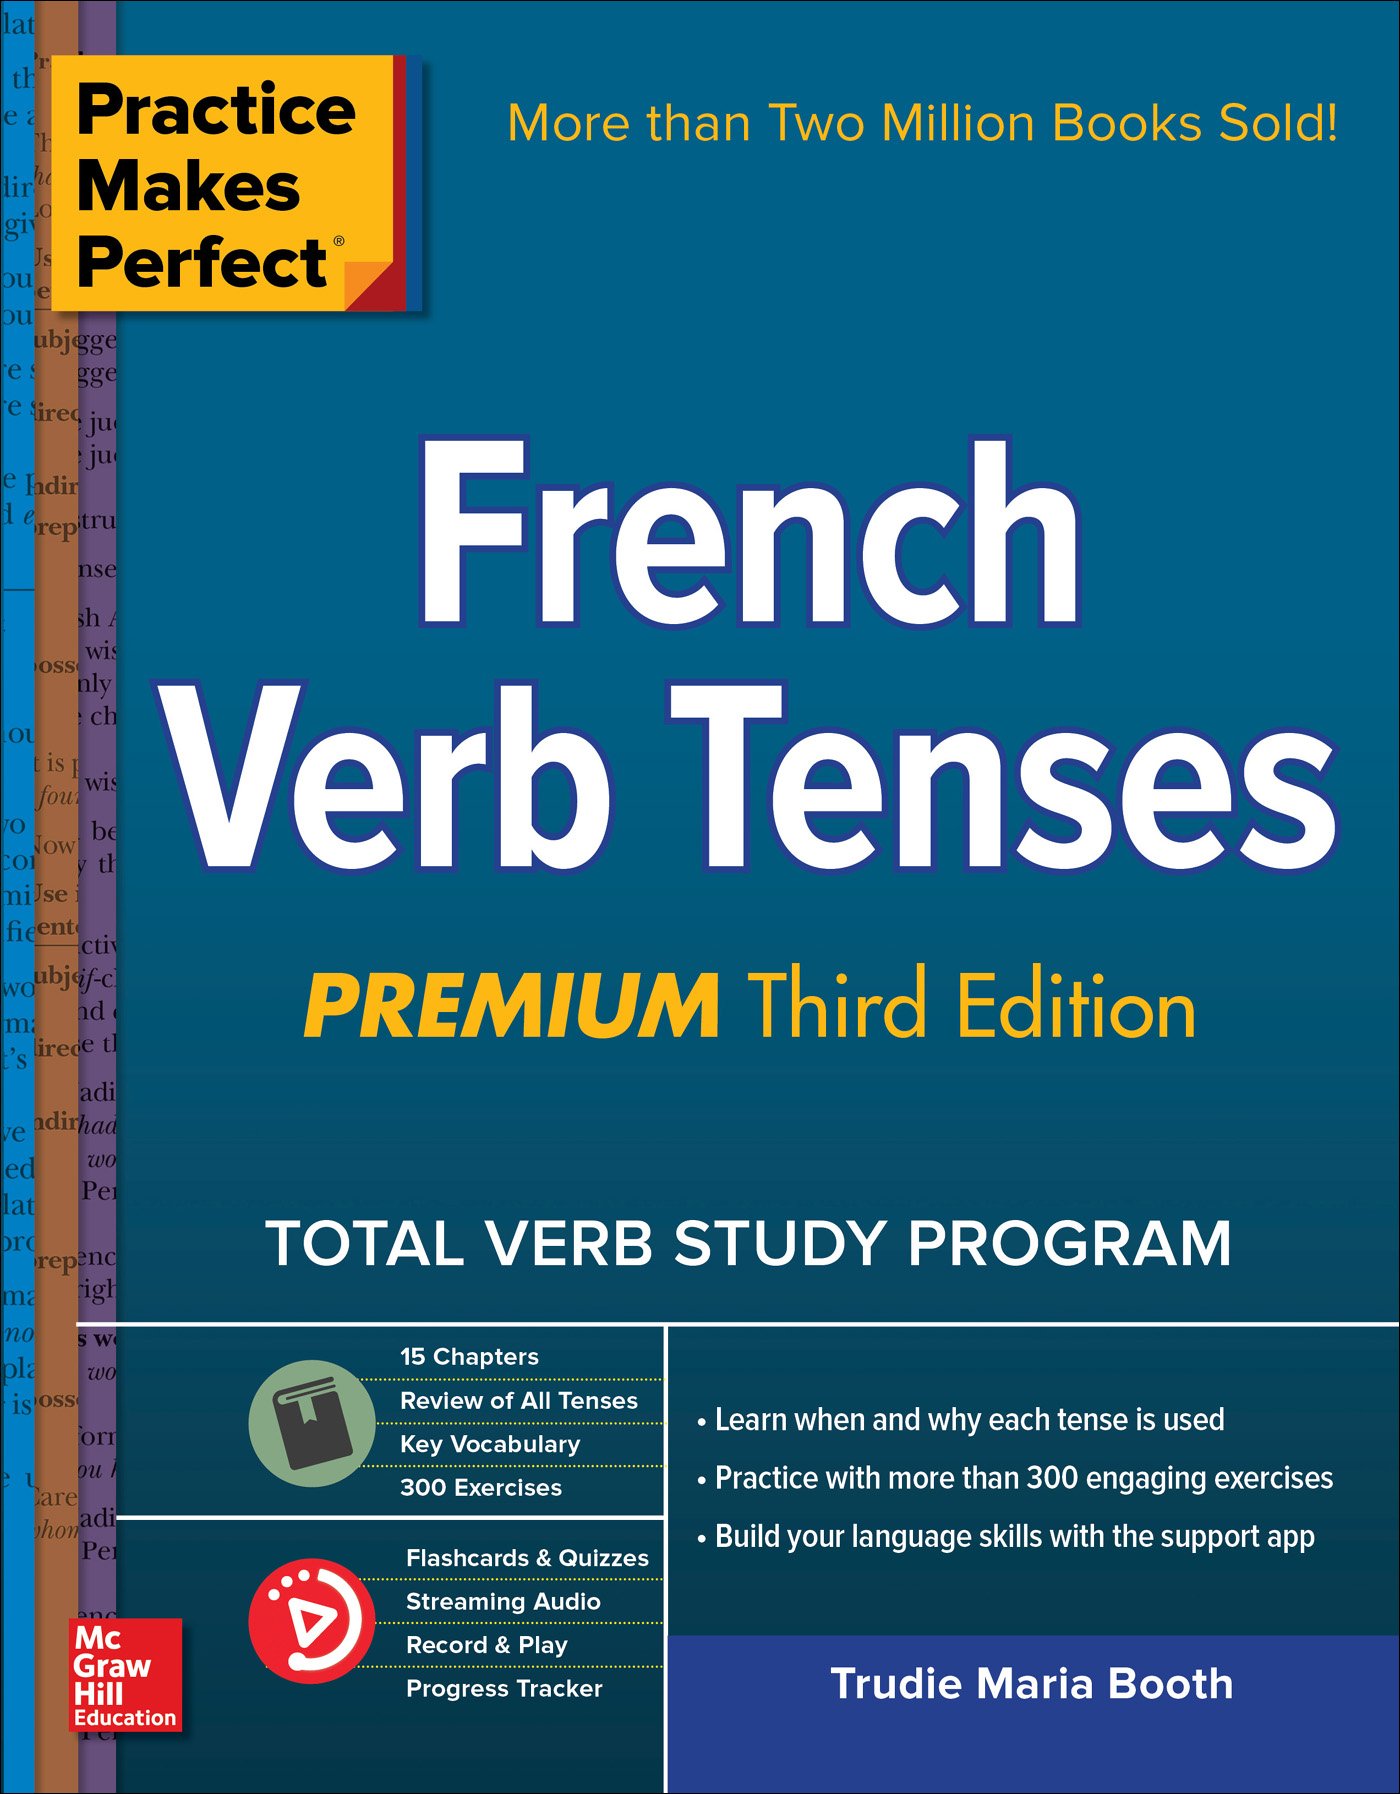 practice-makes-perfect-french-verb-tenses-premium-third-edition-3rd-edition-softarchive